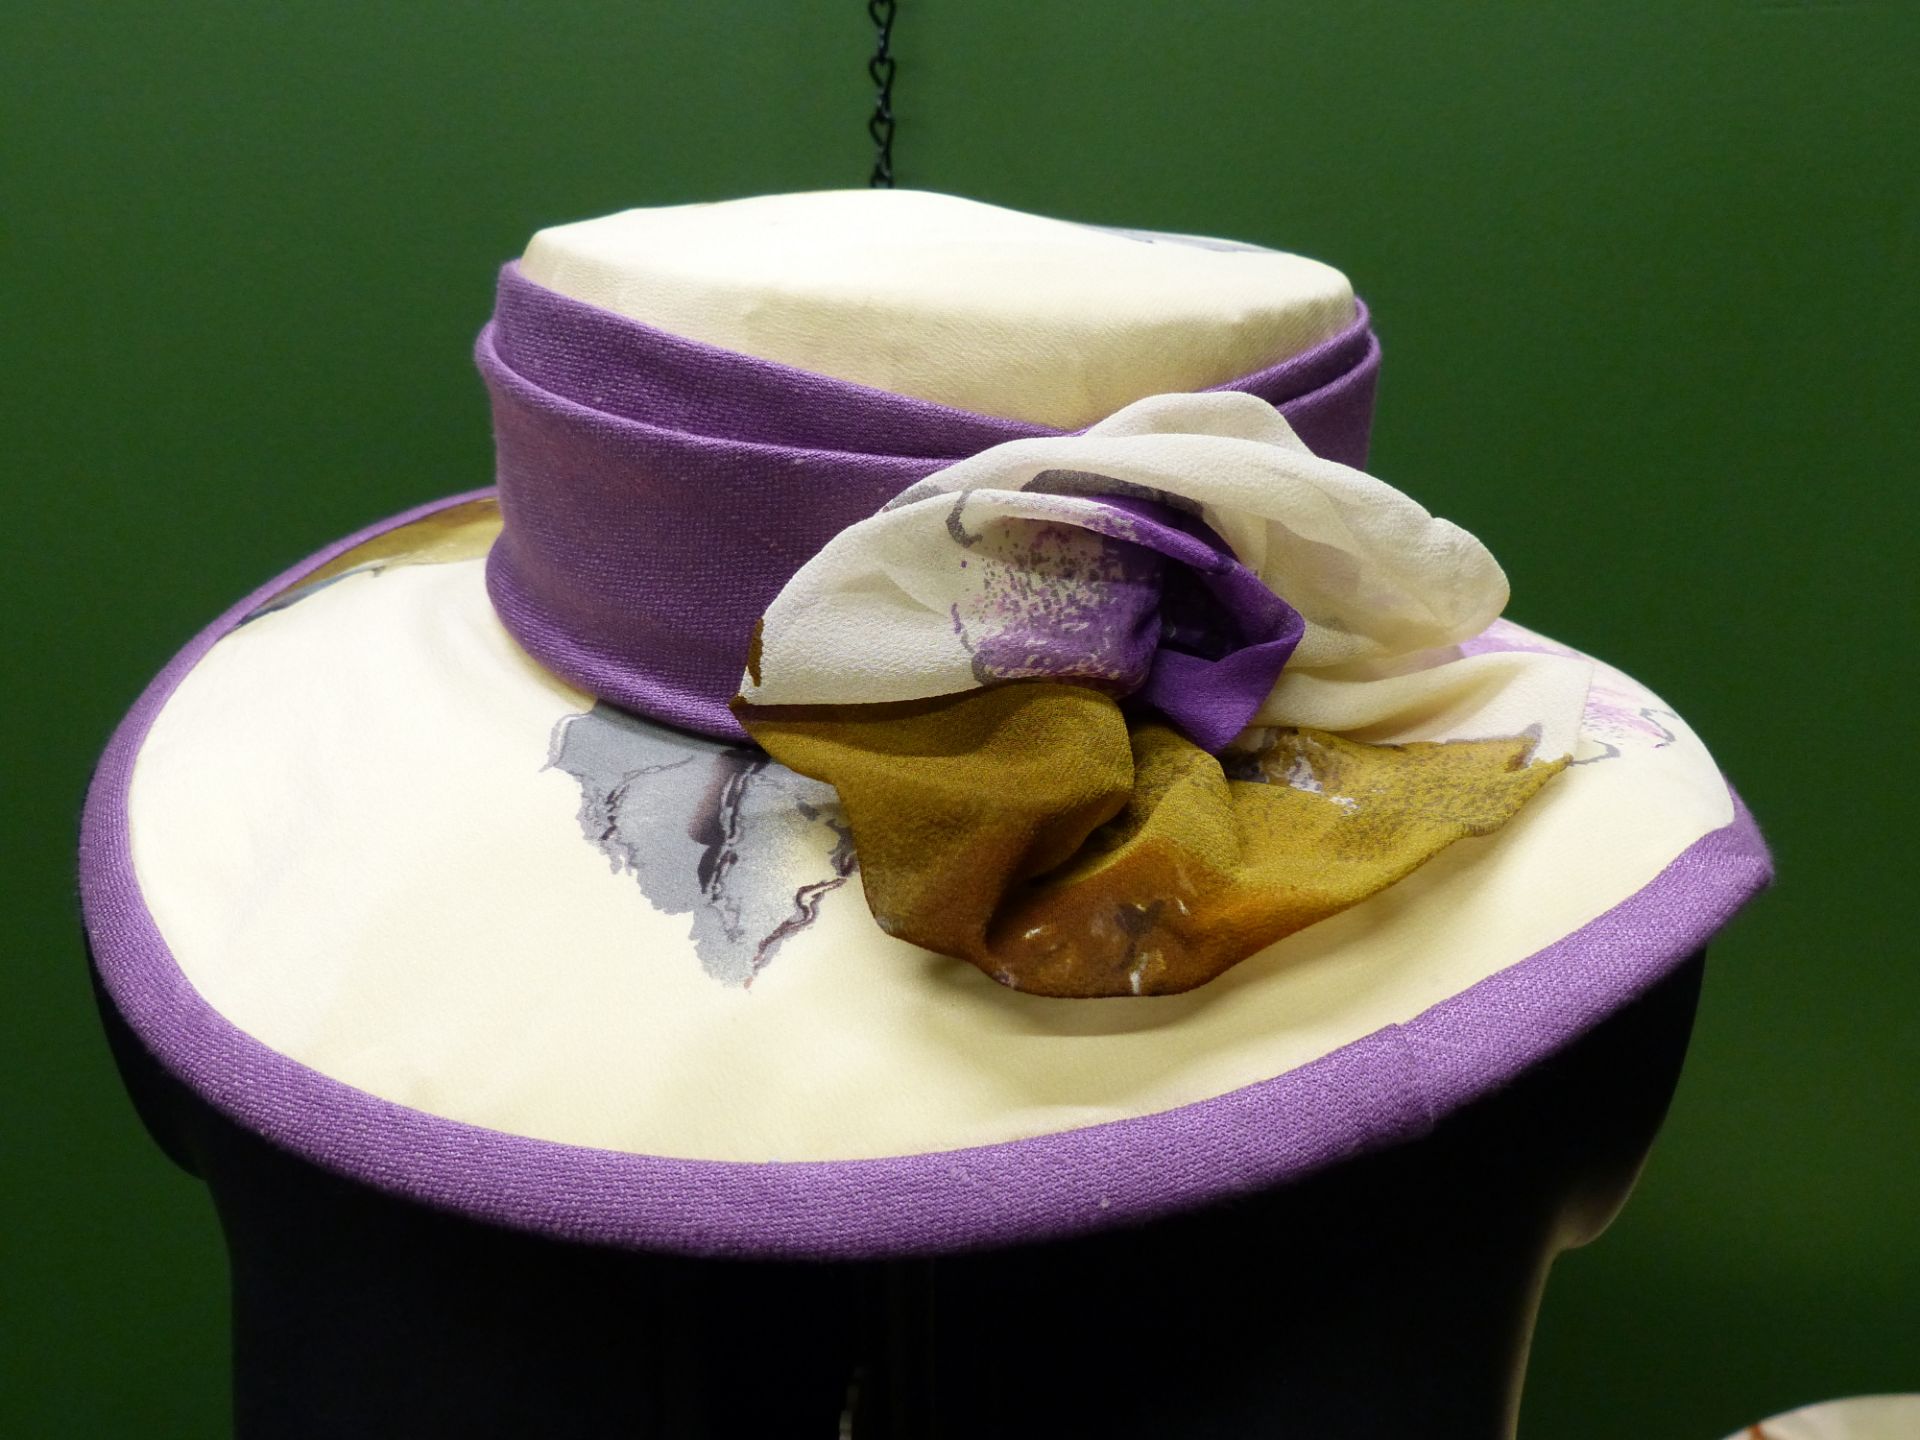 HATS. CHRISTYS ENGLAND BOATER HAT SIZE 58 71/2. TOGETHER WITH A LADIES WEDDING HAT. - Image 7 of 9